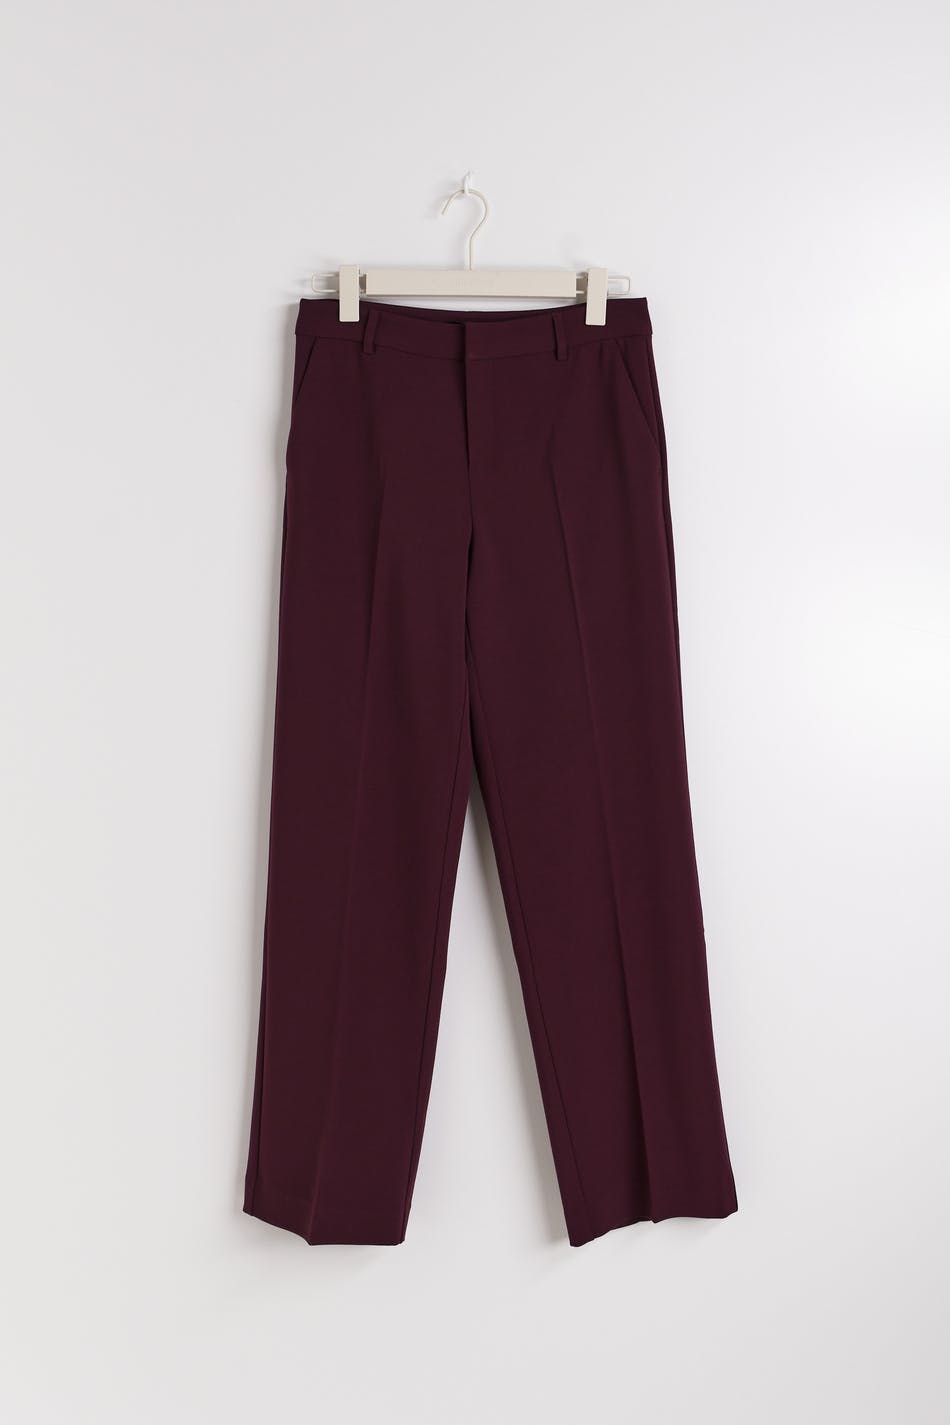 Gina Tricot - Straight tall trousers - byxor - Red - 32 - Female